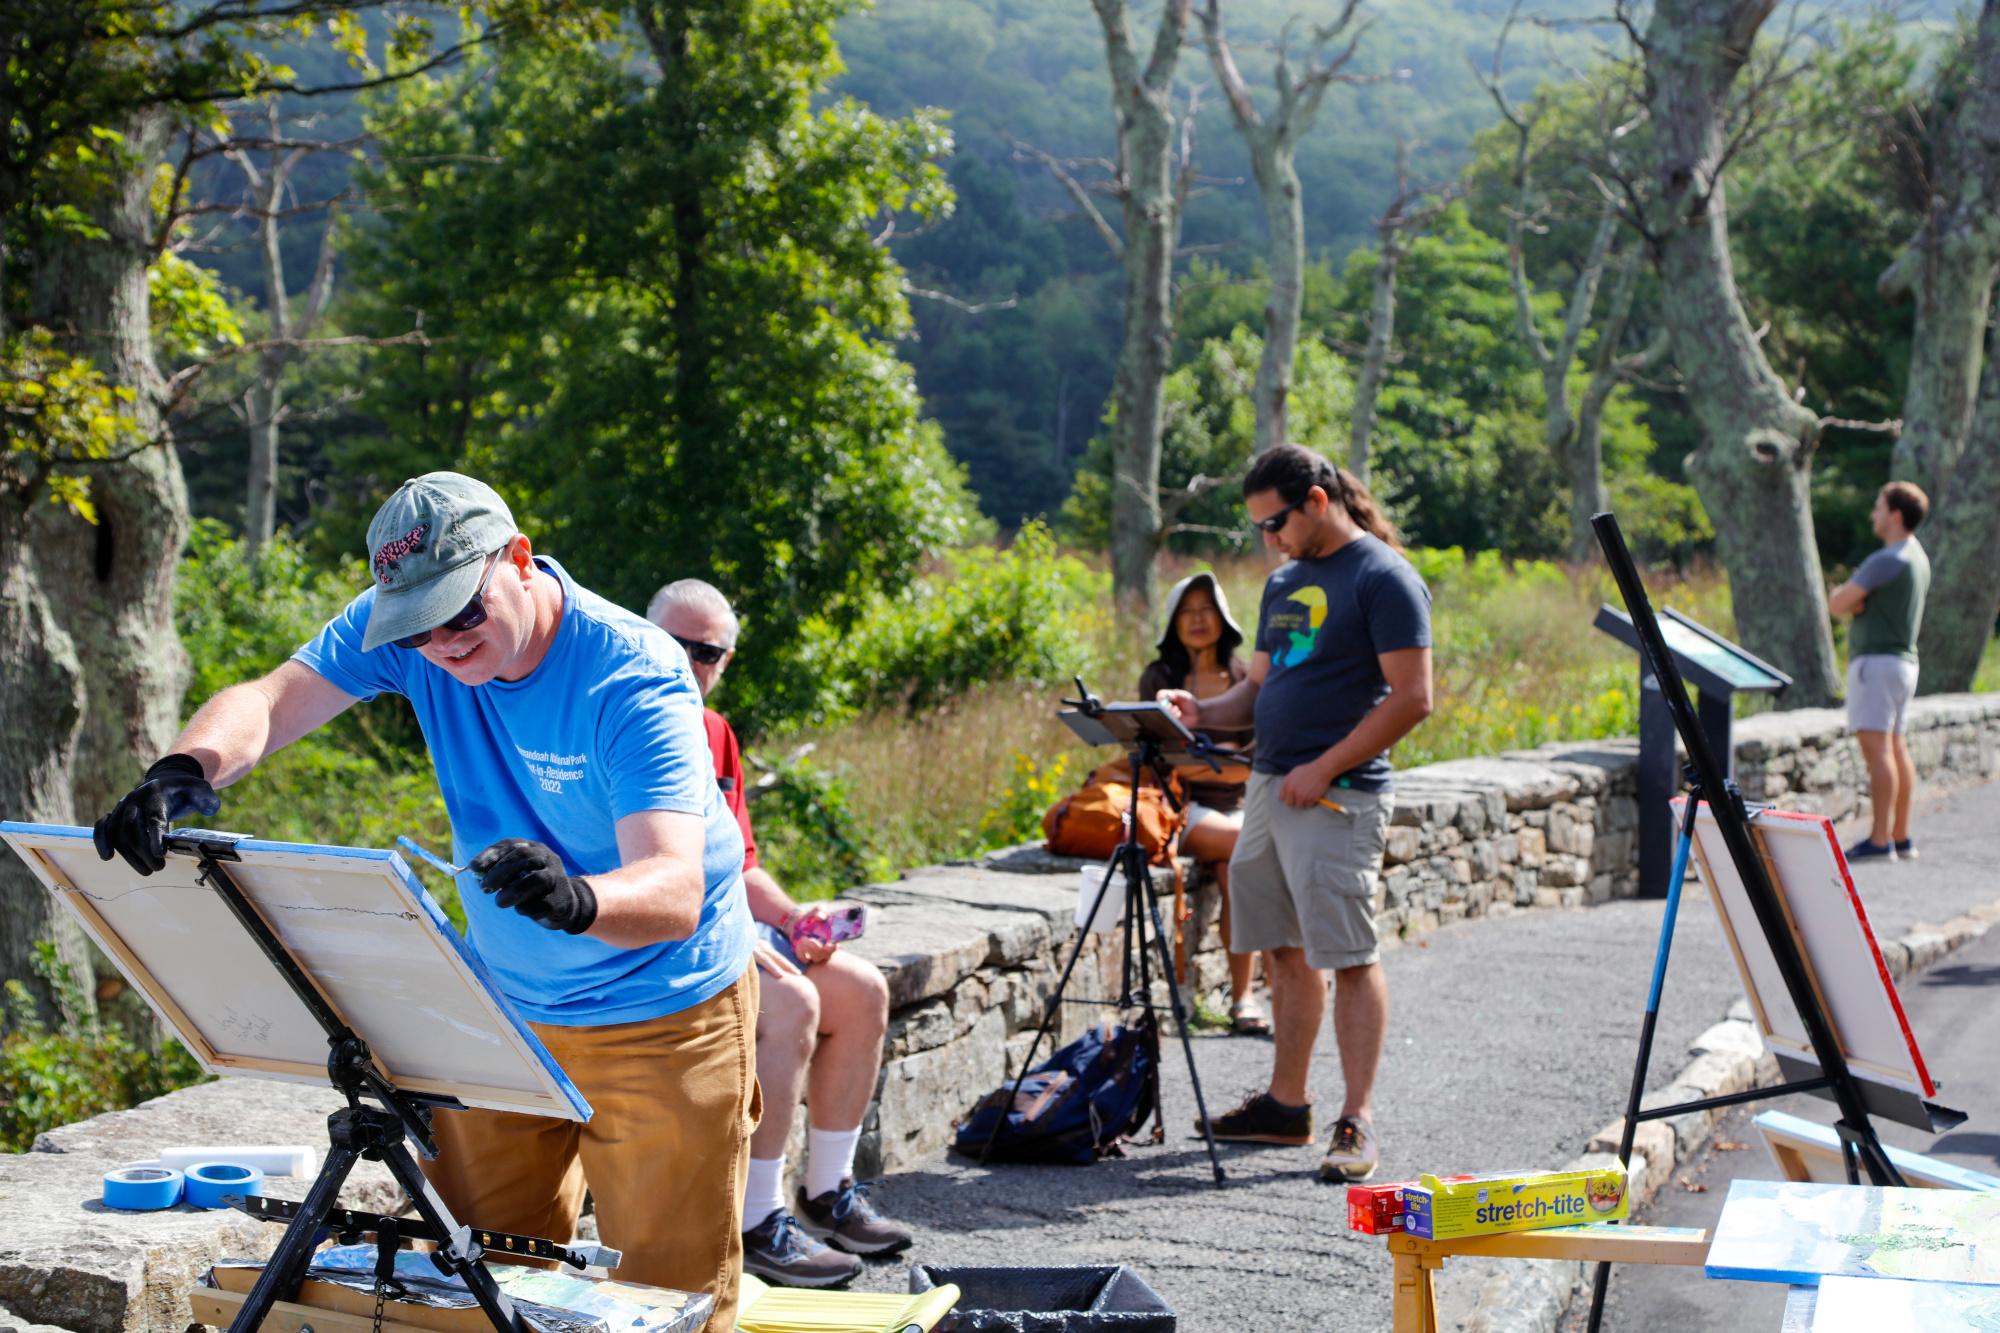 An artist giving a plein air painting demonstration surrounded by art supplies and visitors.